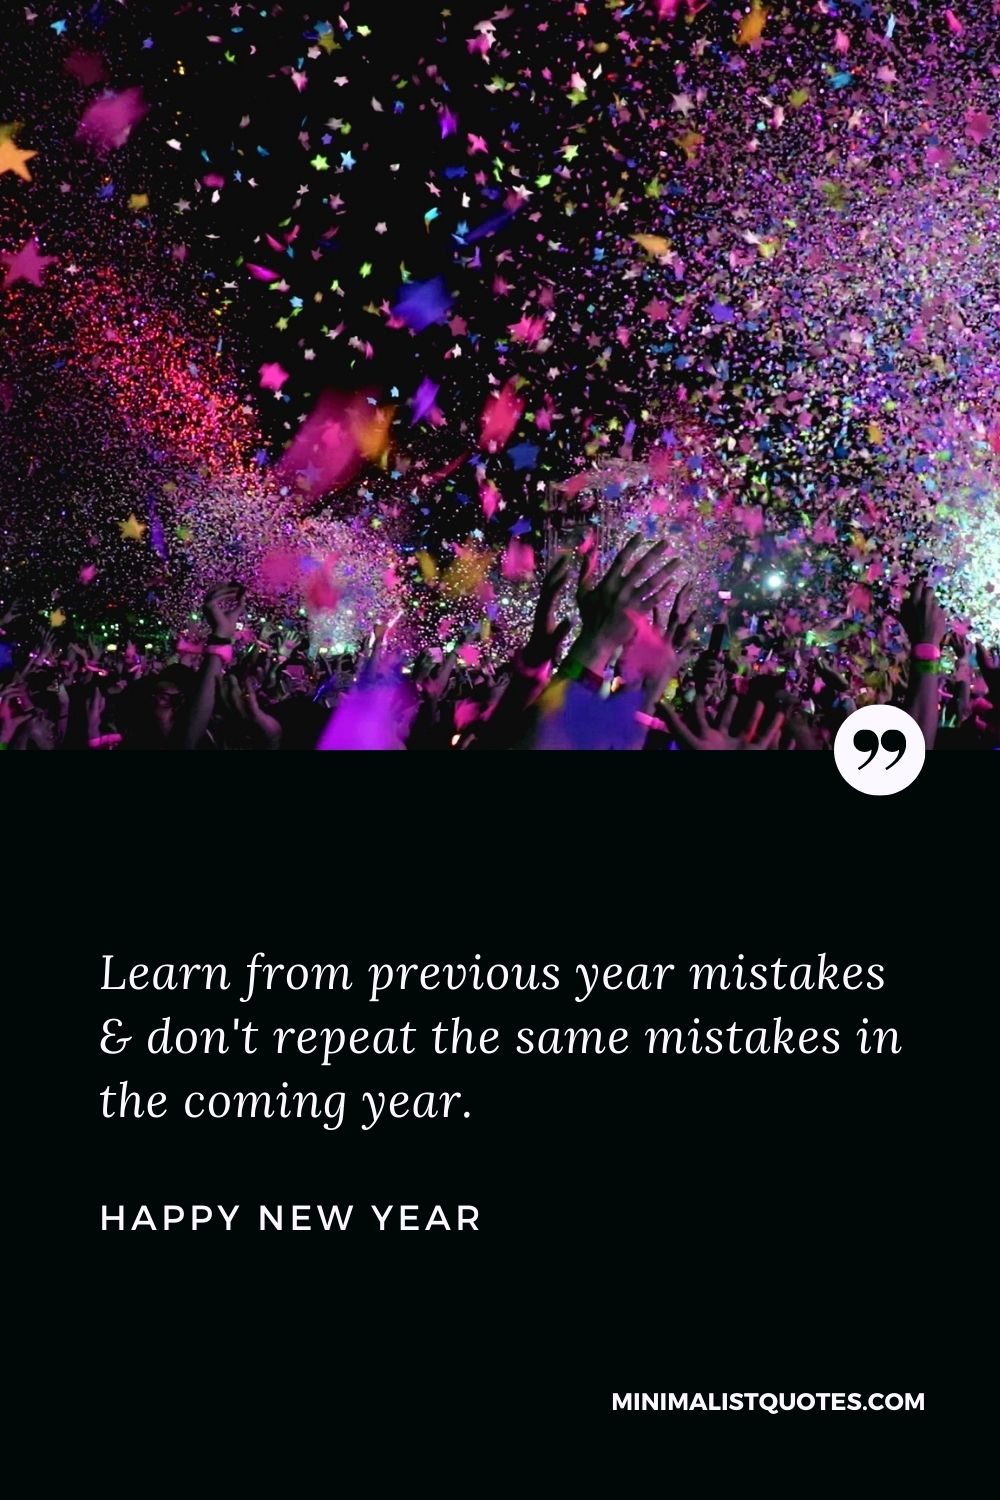 New Year Wish - Learn from previous year mistakes & don't repeat the same mistakes in the coming year.